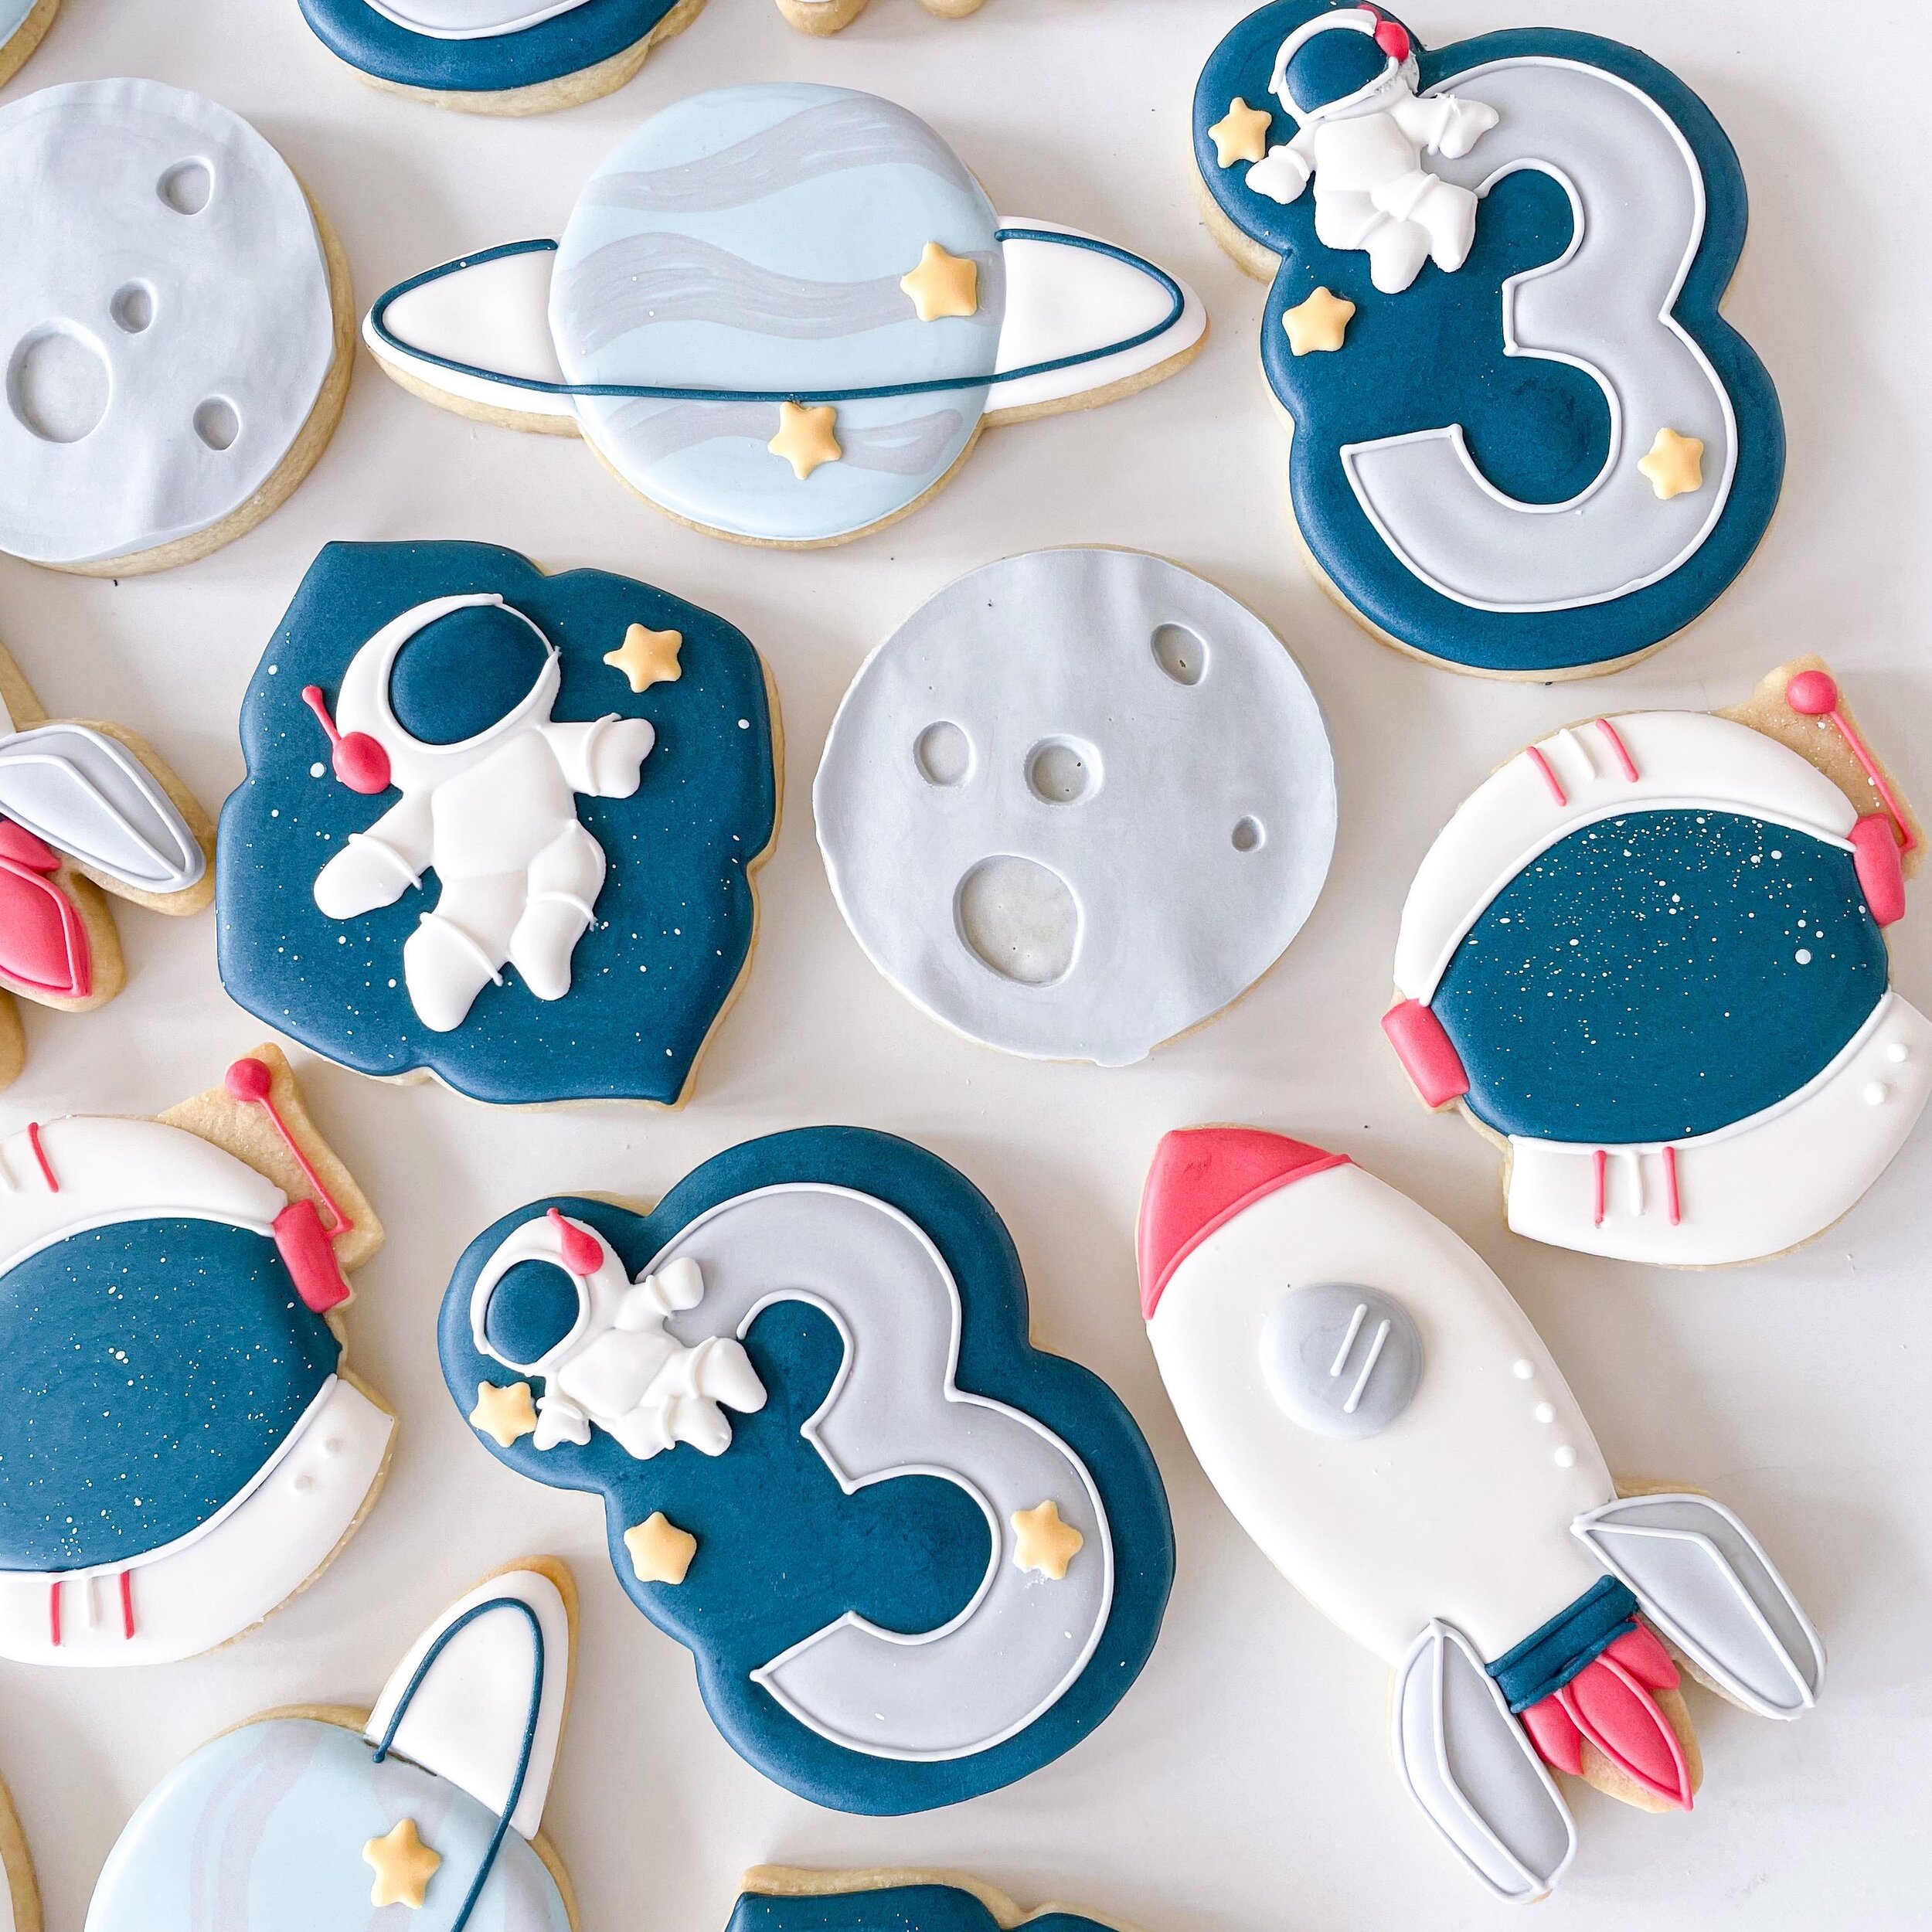 Love this birthday theme 🚀

Thank you to @confettiyeticookies for the cute inspo with the number cookie 

#spacecookies #birthdaycookies #customcookies